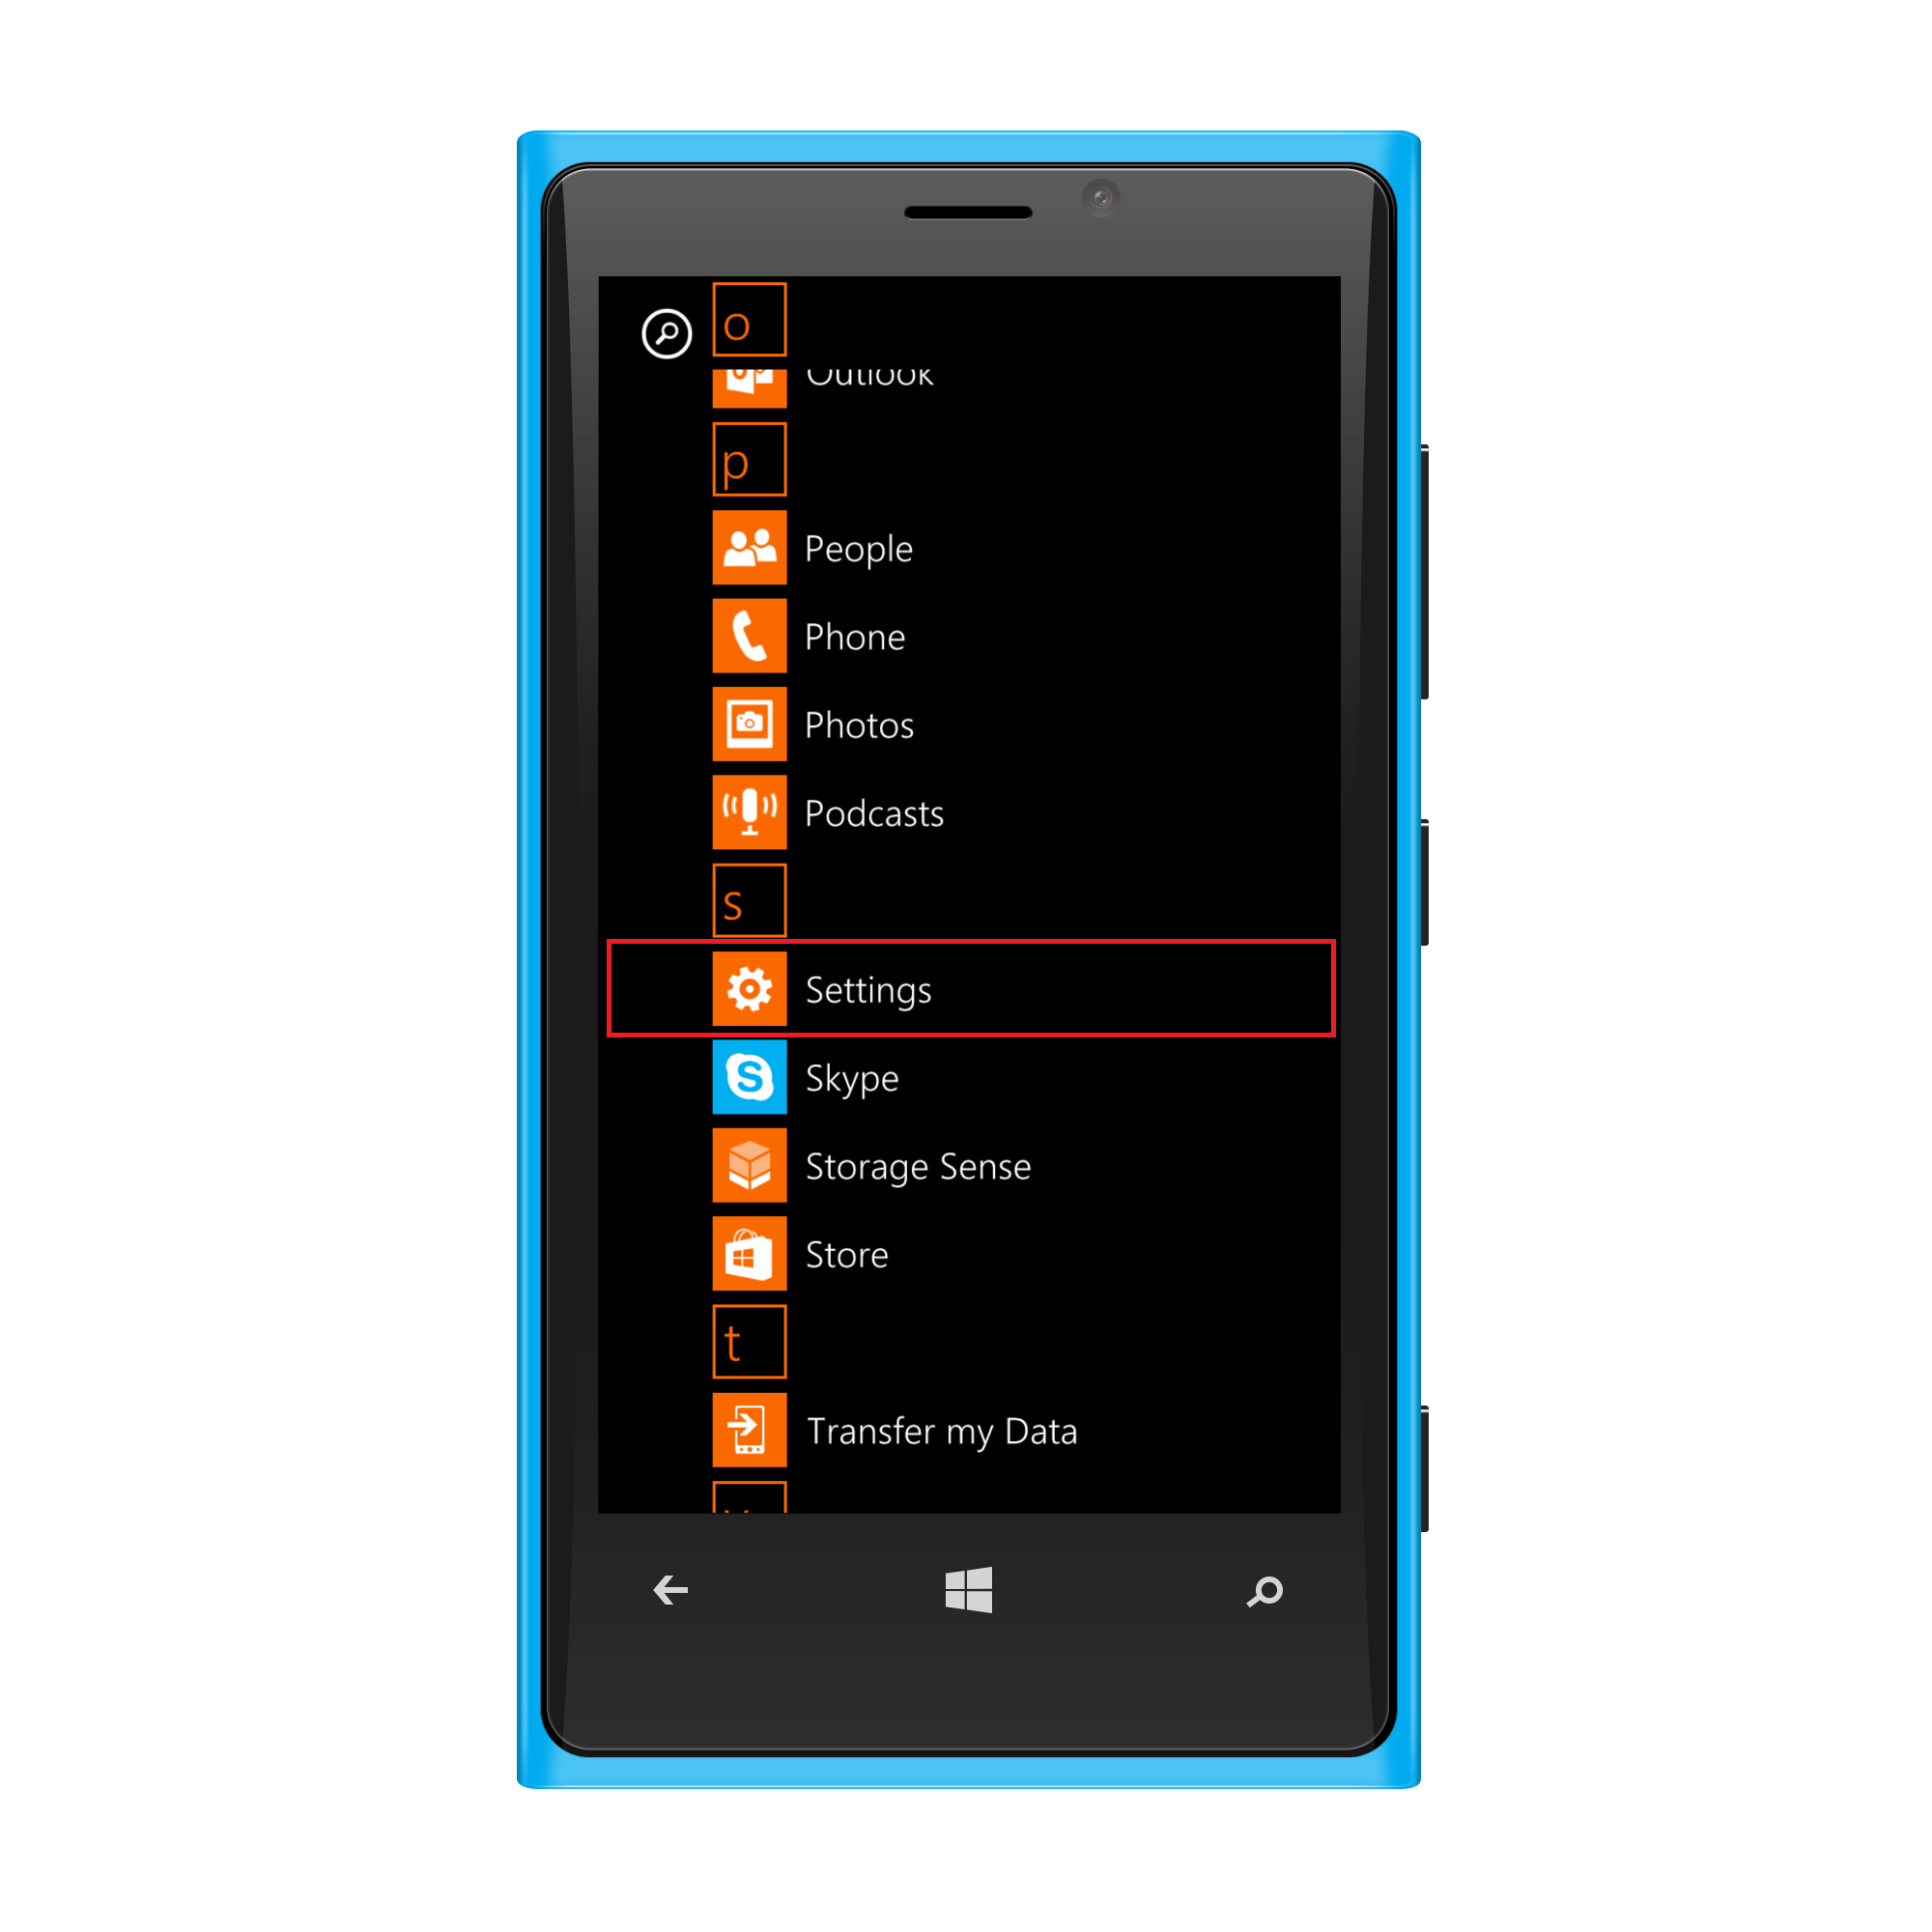 Location of Settings on Windows phone to enable Geotracking